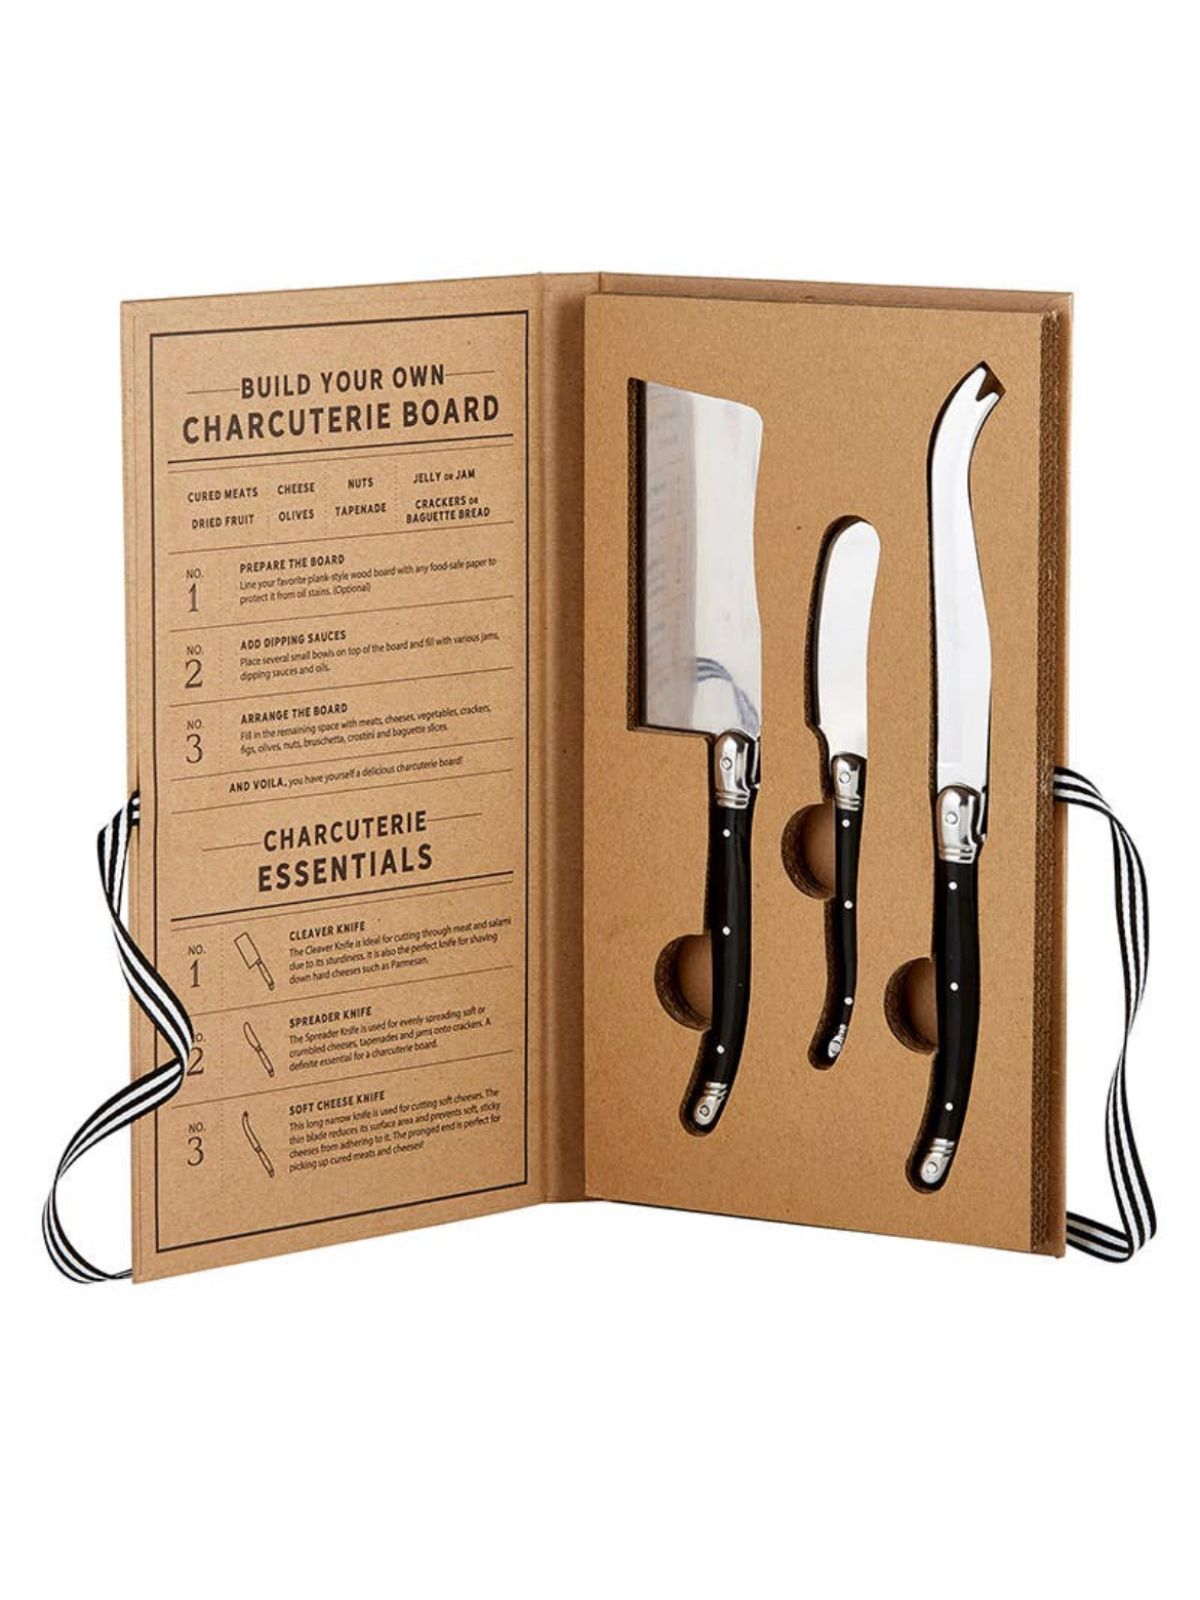 These unique stainless steel charcuterie essential knives in a cardboard box are a must and makes it a great kitchen gift. Available at KYA Home Decor